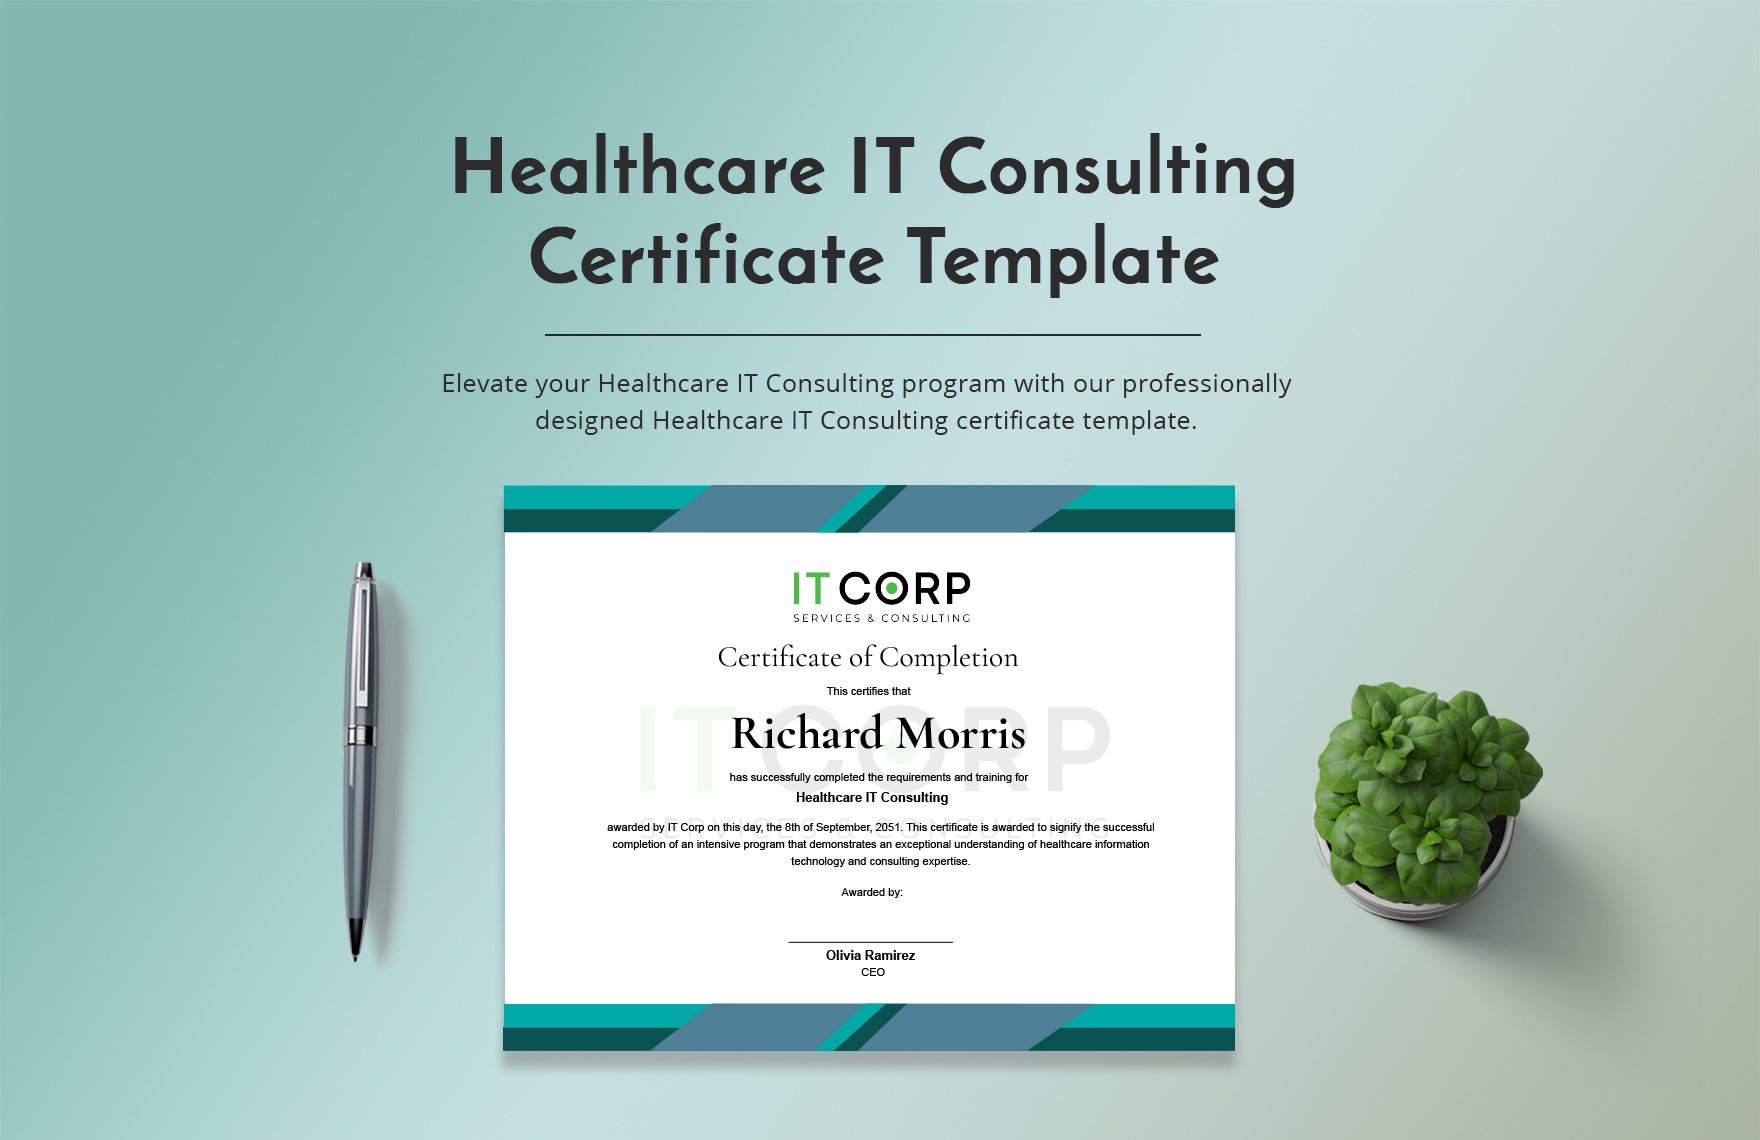 Healthcare IT Consulting Certificate Template